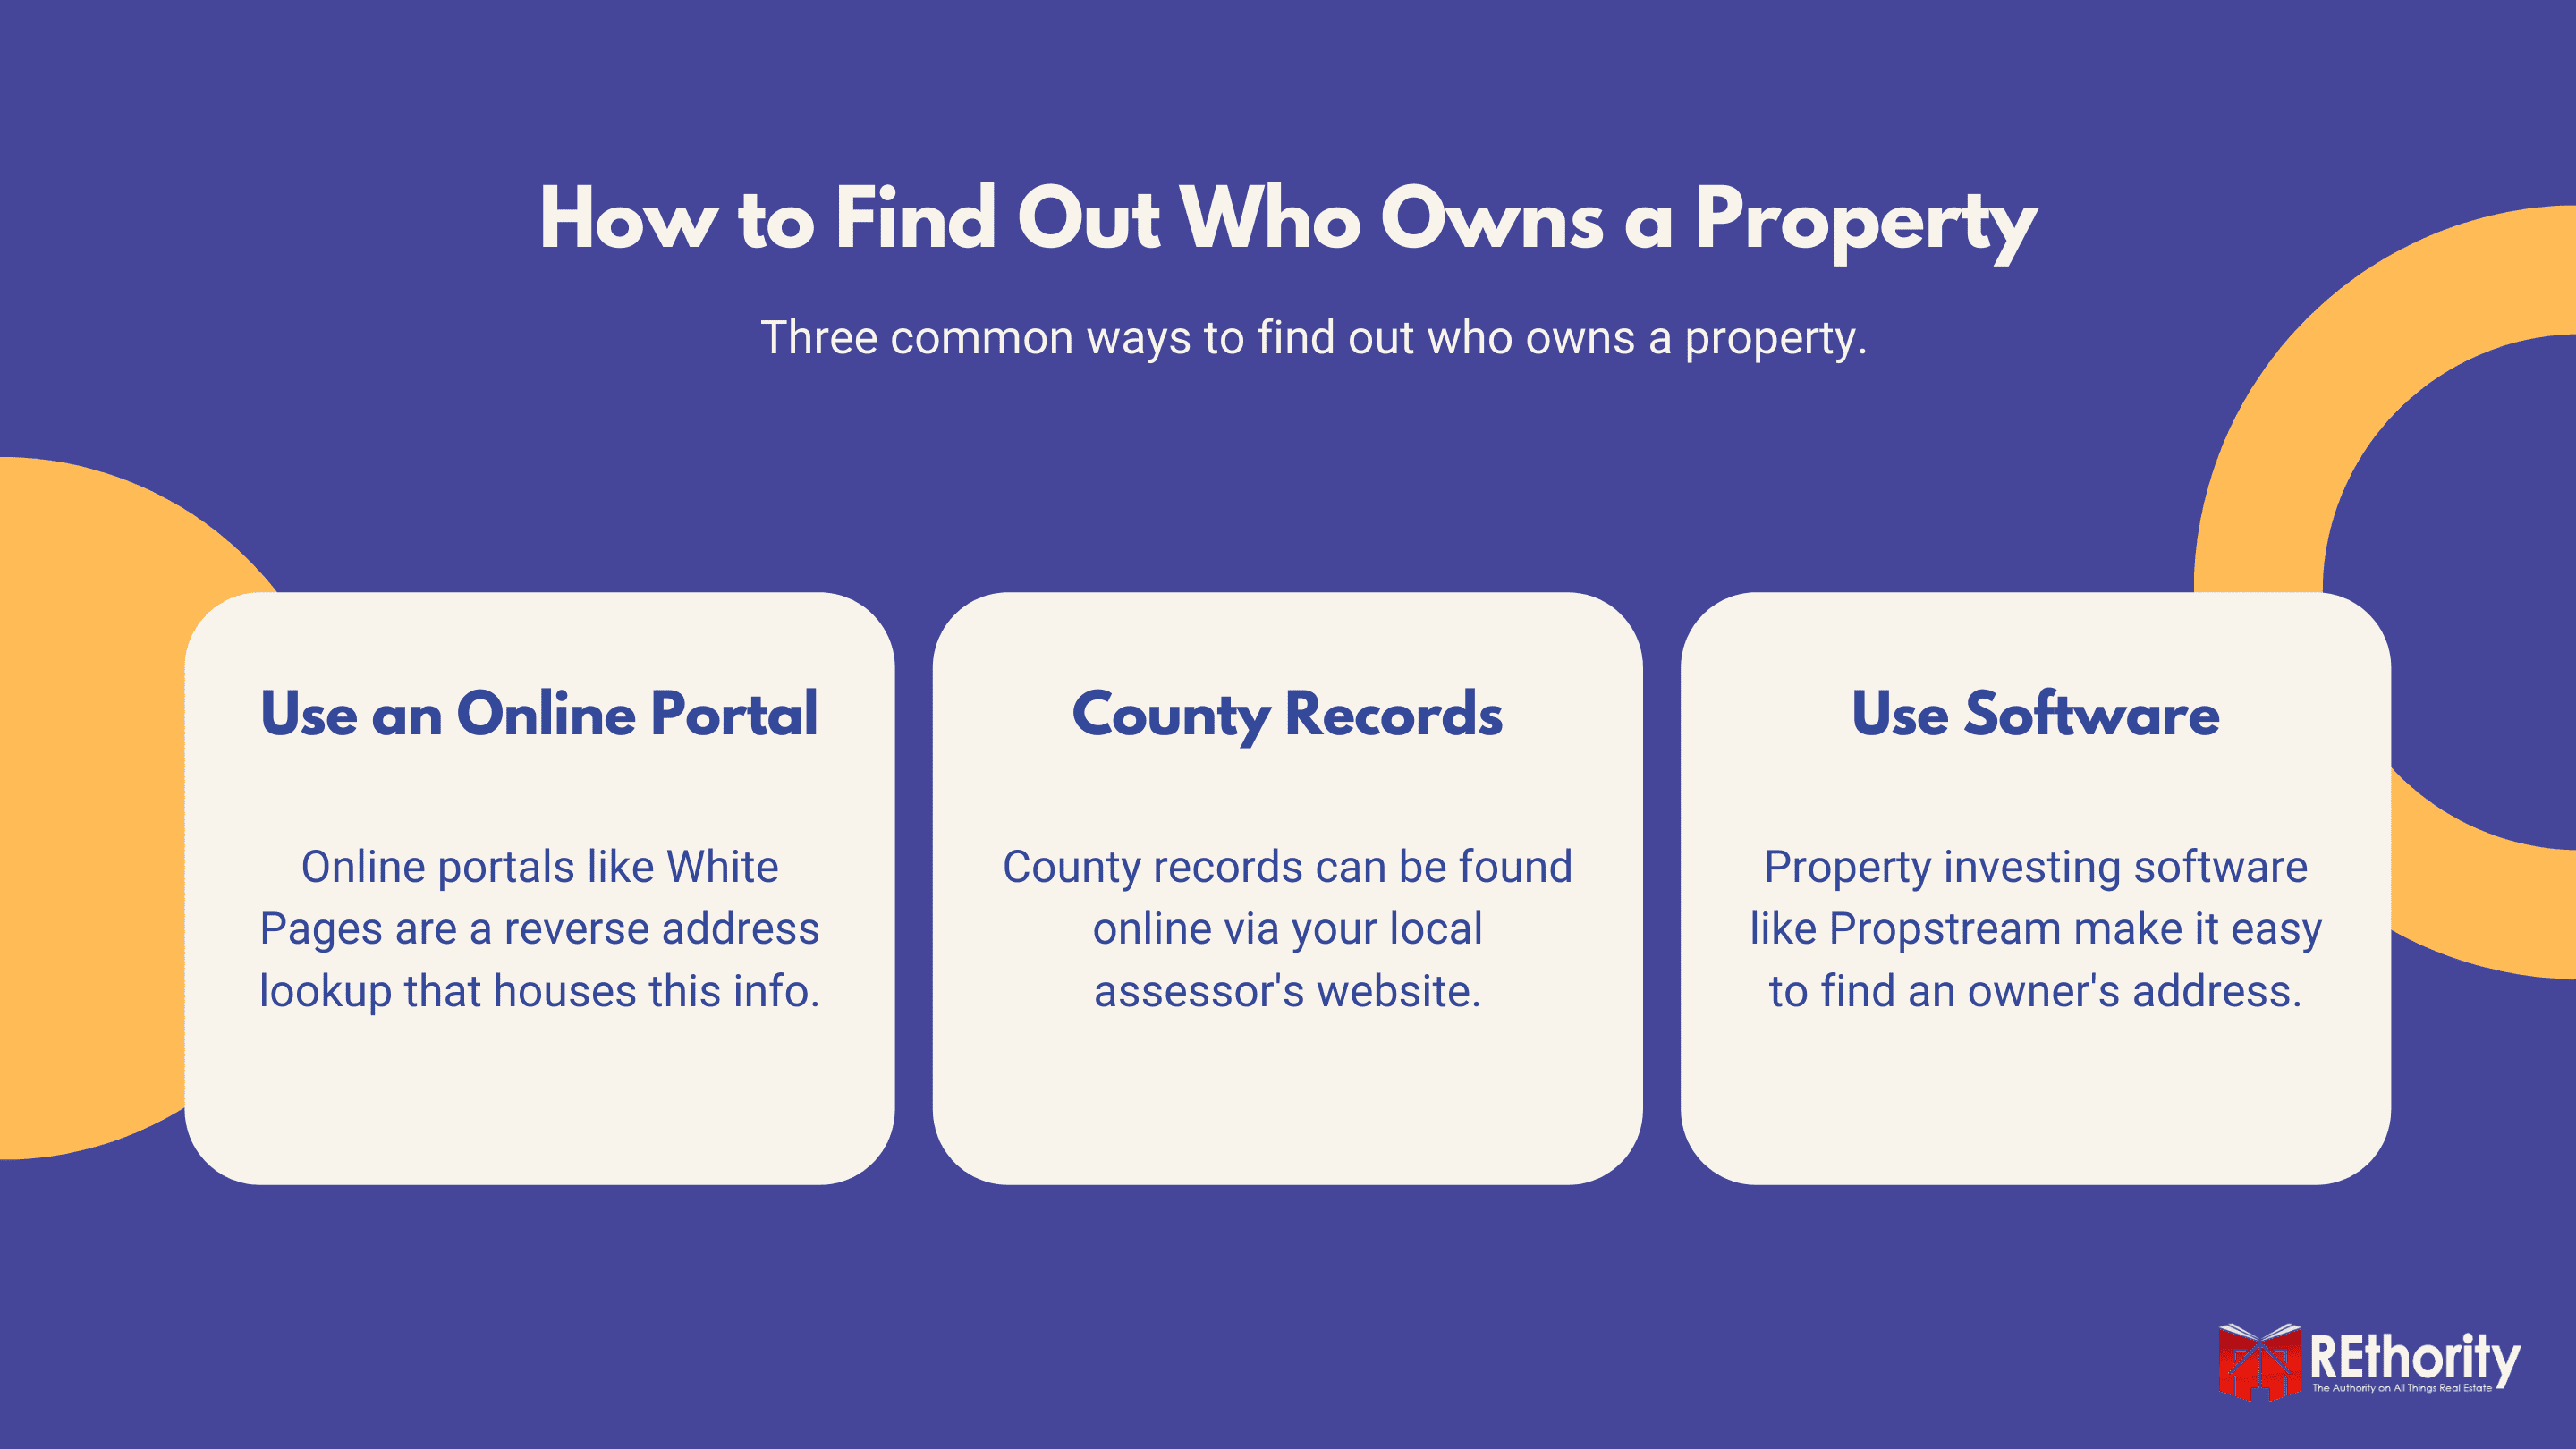 How to Find Out Who Owns a Property graphic against a blue background with three separate ways to find an owner's address